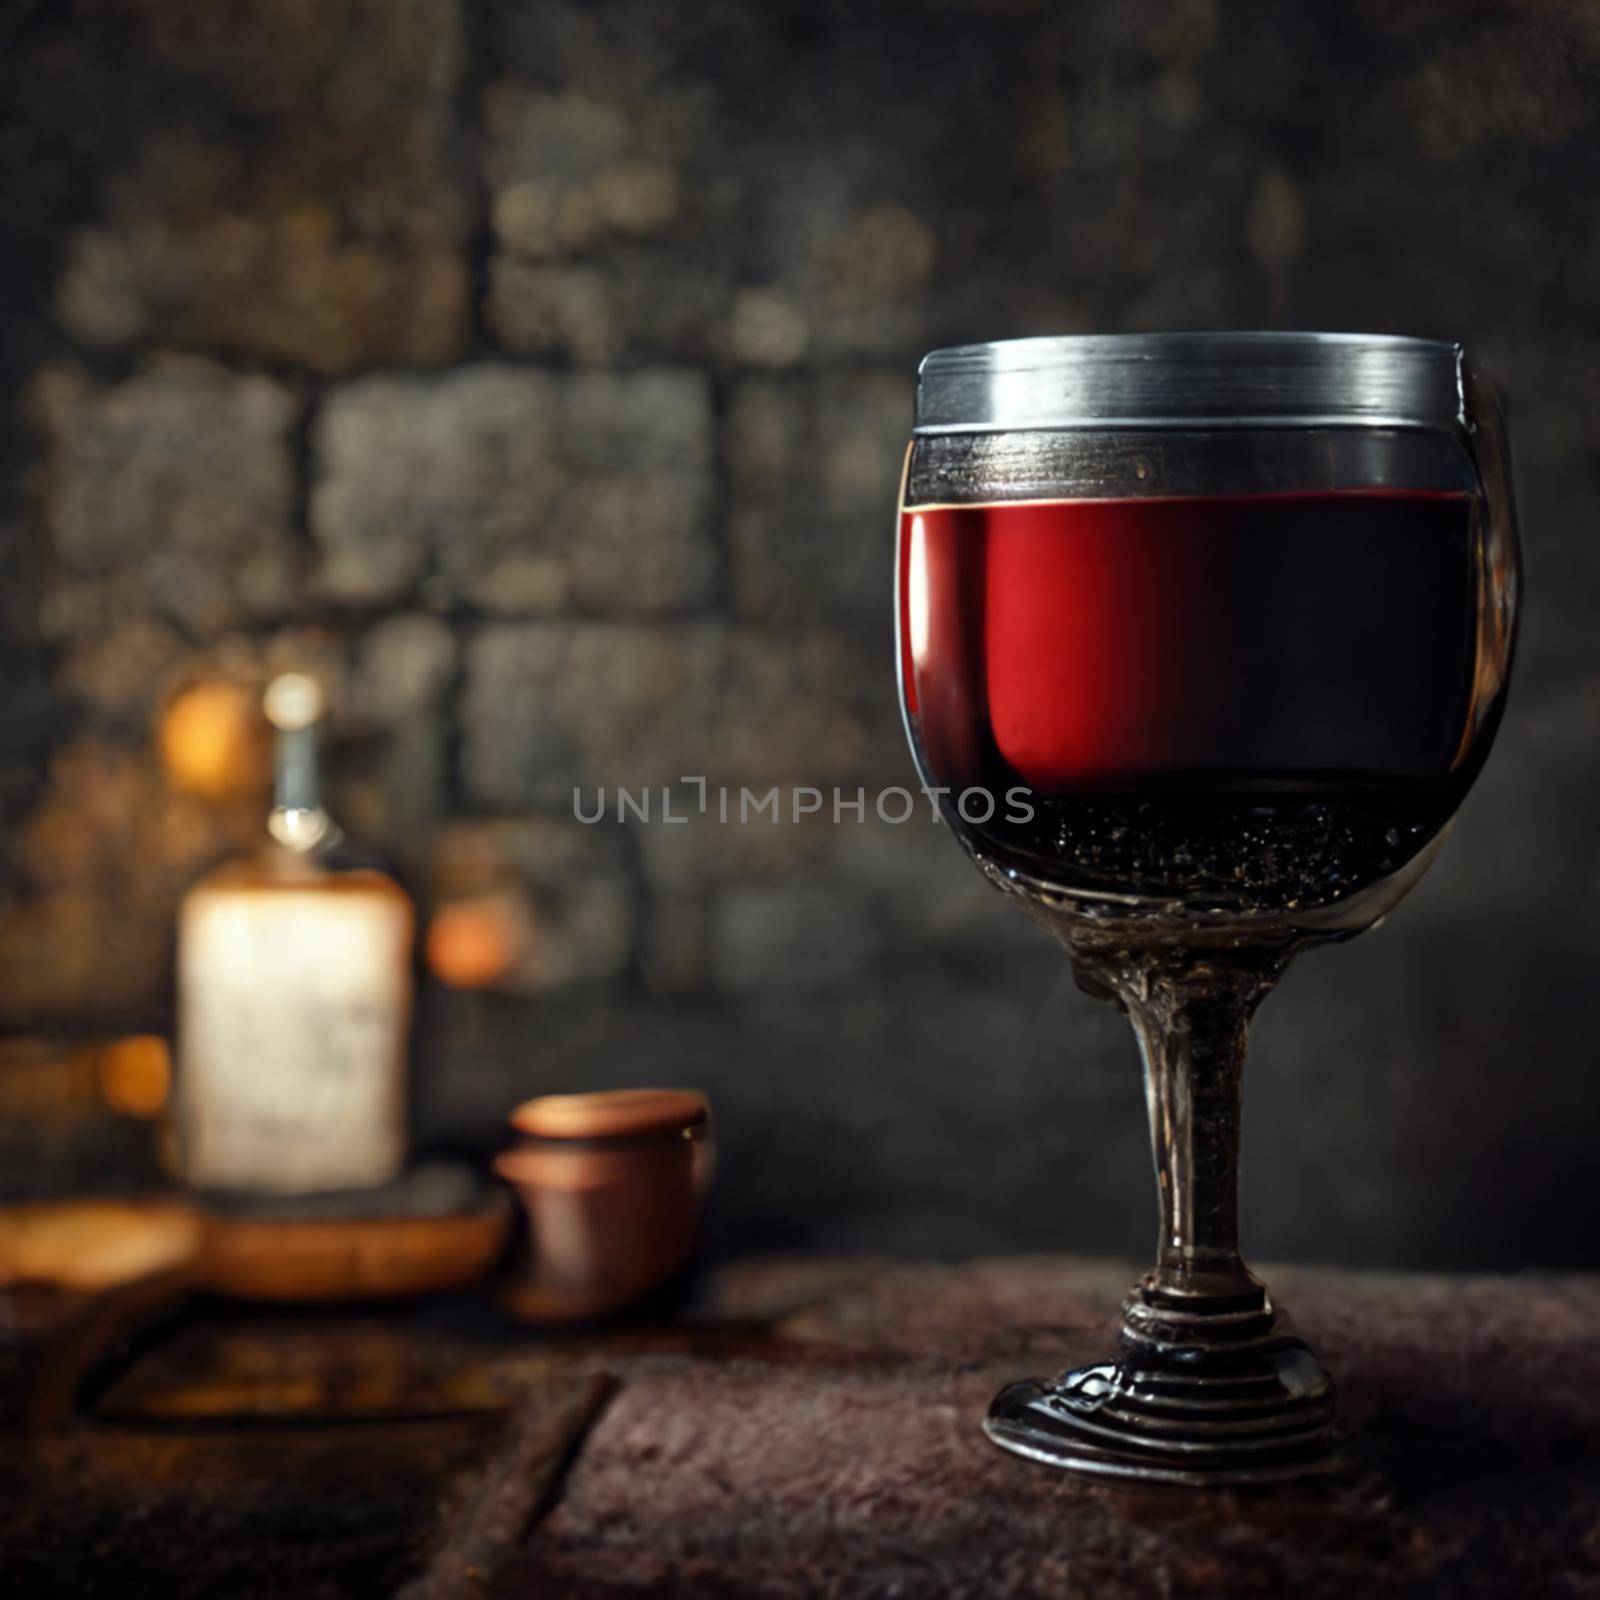 Still life with wine and glass. High quality illustration